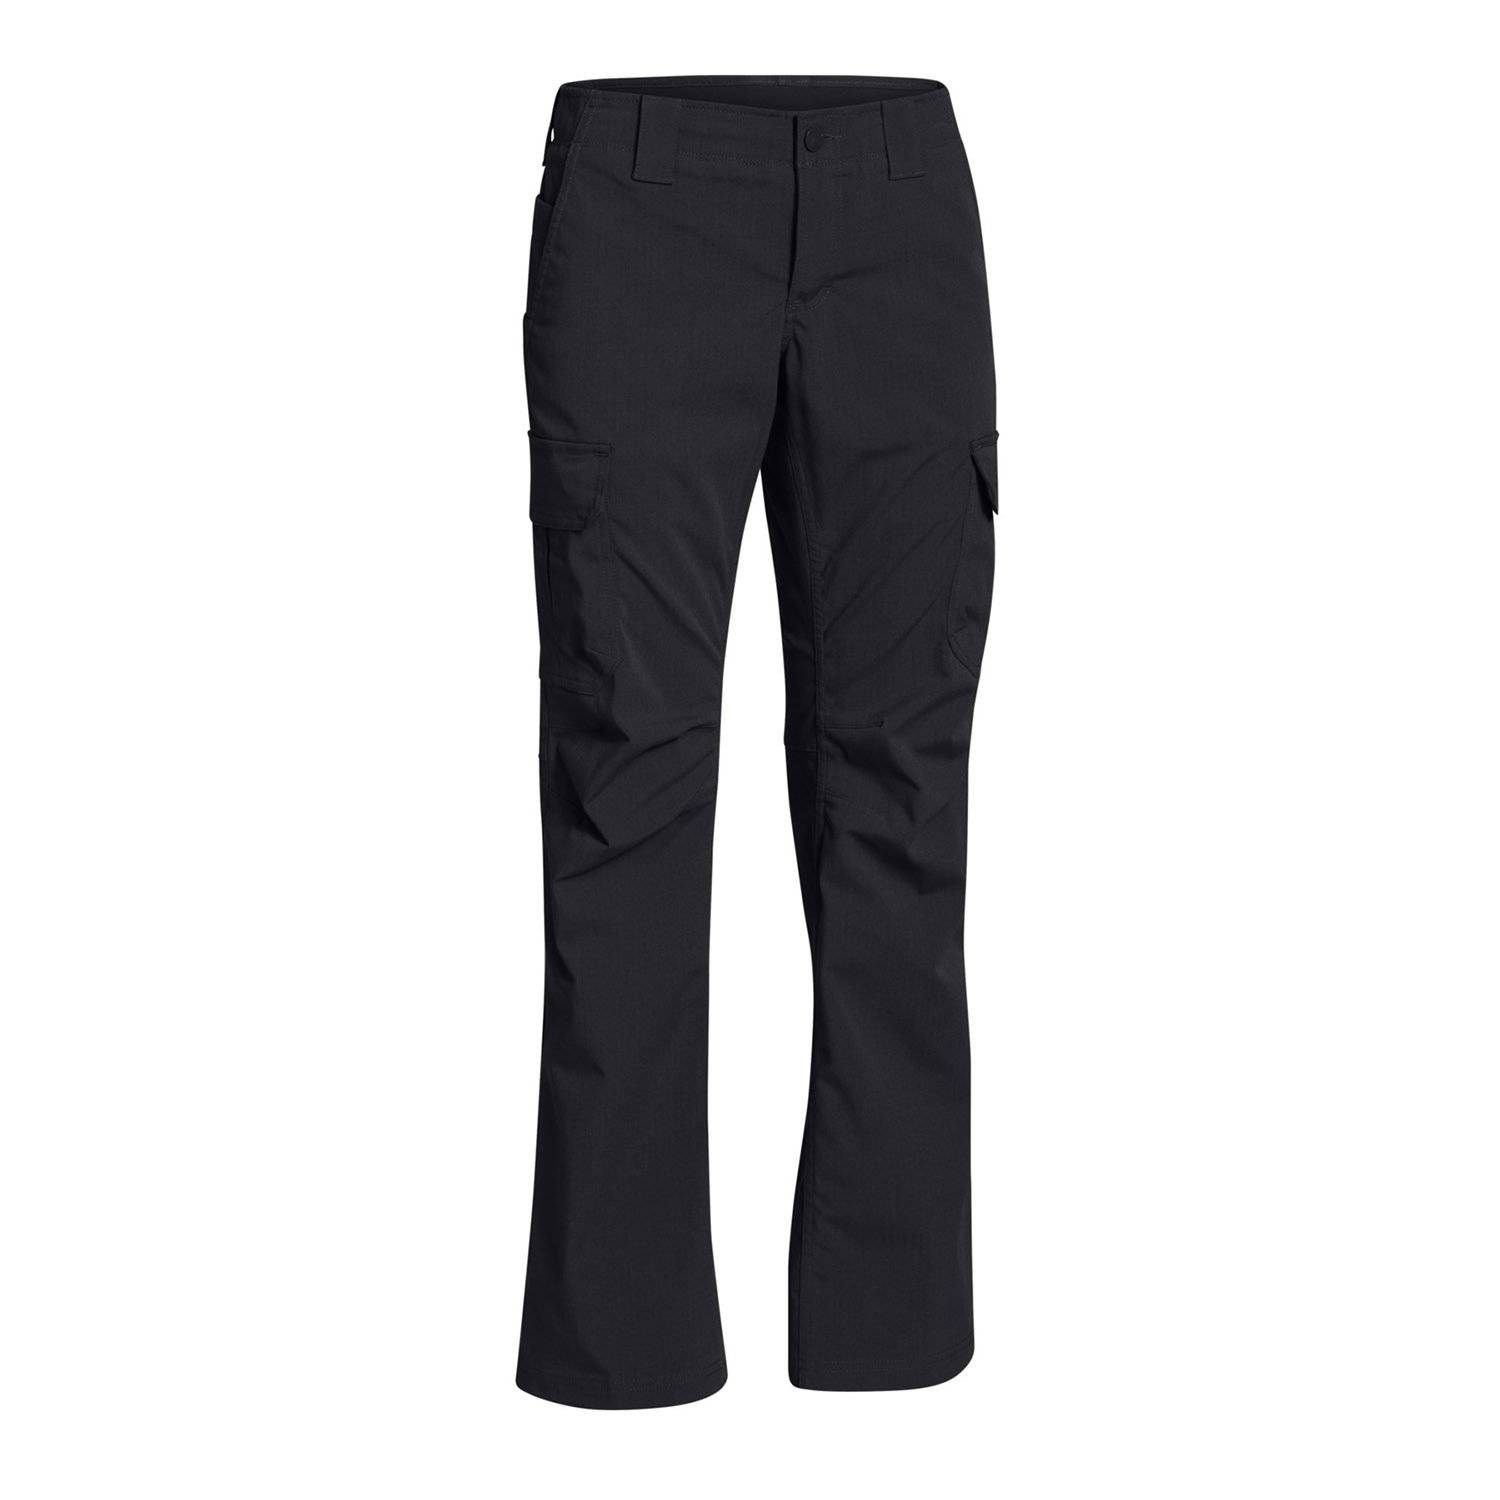 UNDER ARMOUR TACTICAL Patrol Pants II - Conceal Carry Field Duty Cargo Pants  $79.99 - PicClick